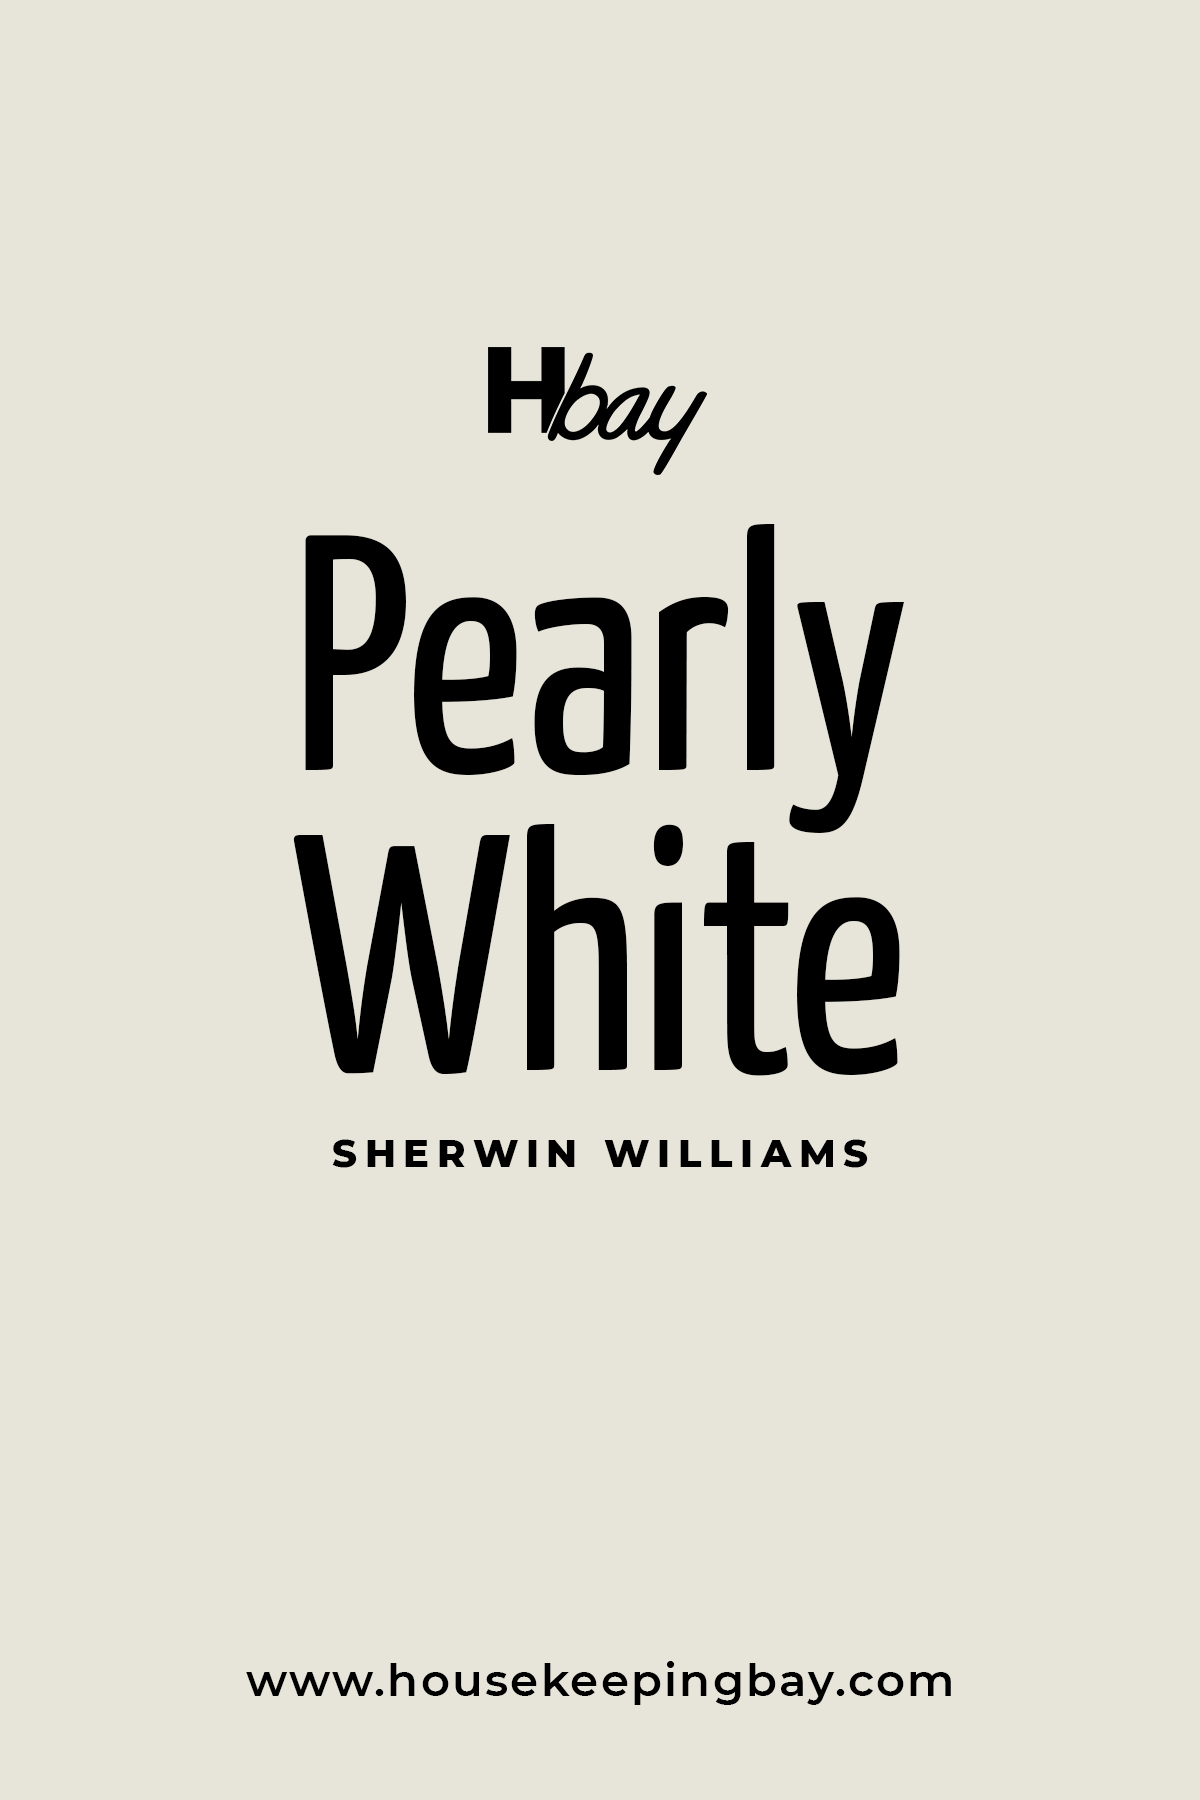 Pearly White by Sherwin Williams